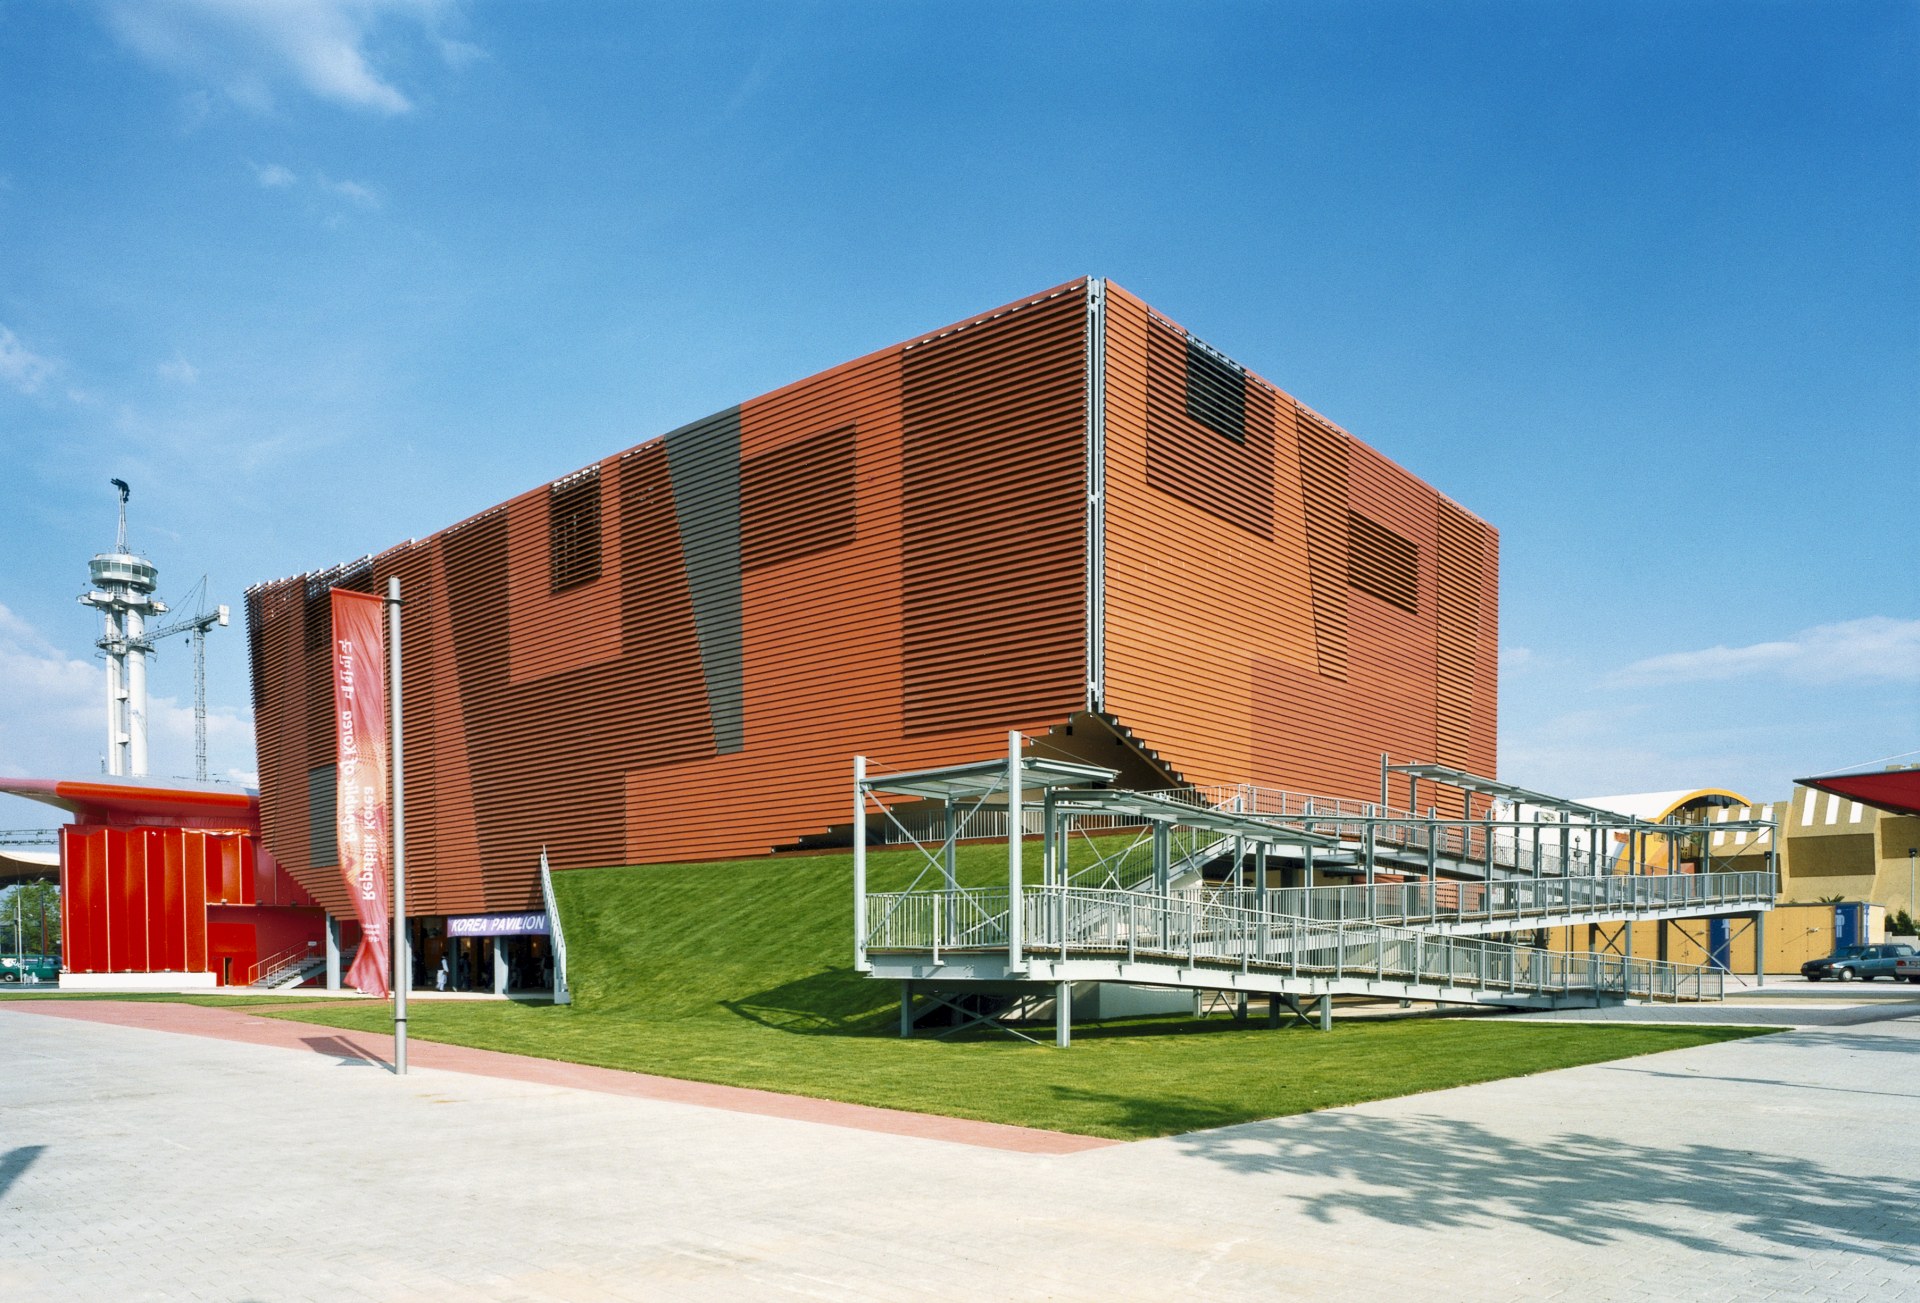 Frontal view on Korean Pavilion, Takenaka constructed for EXPO 2000 in Hanover